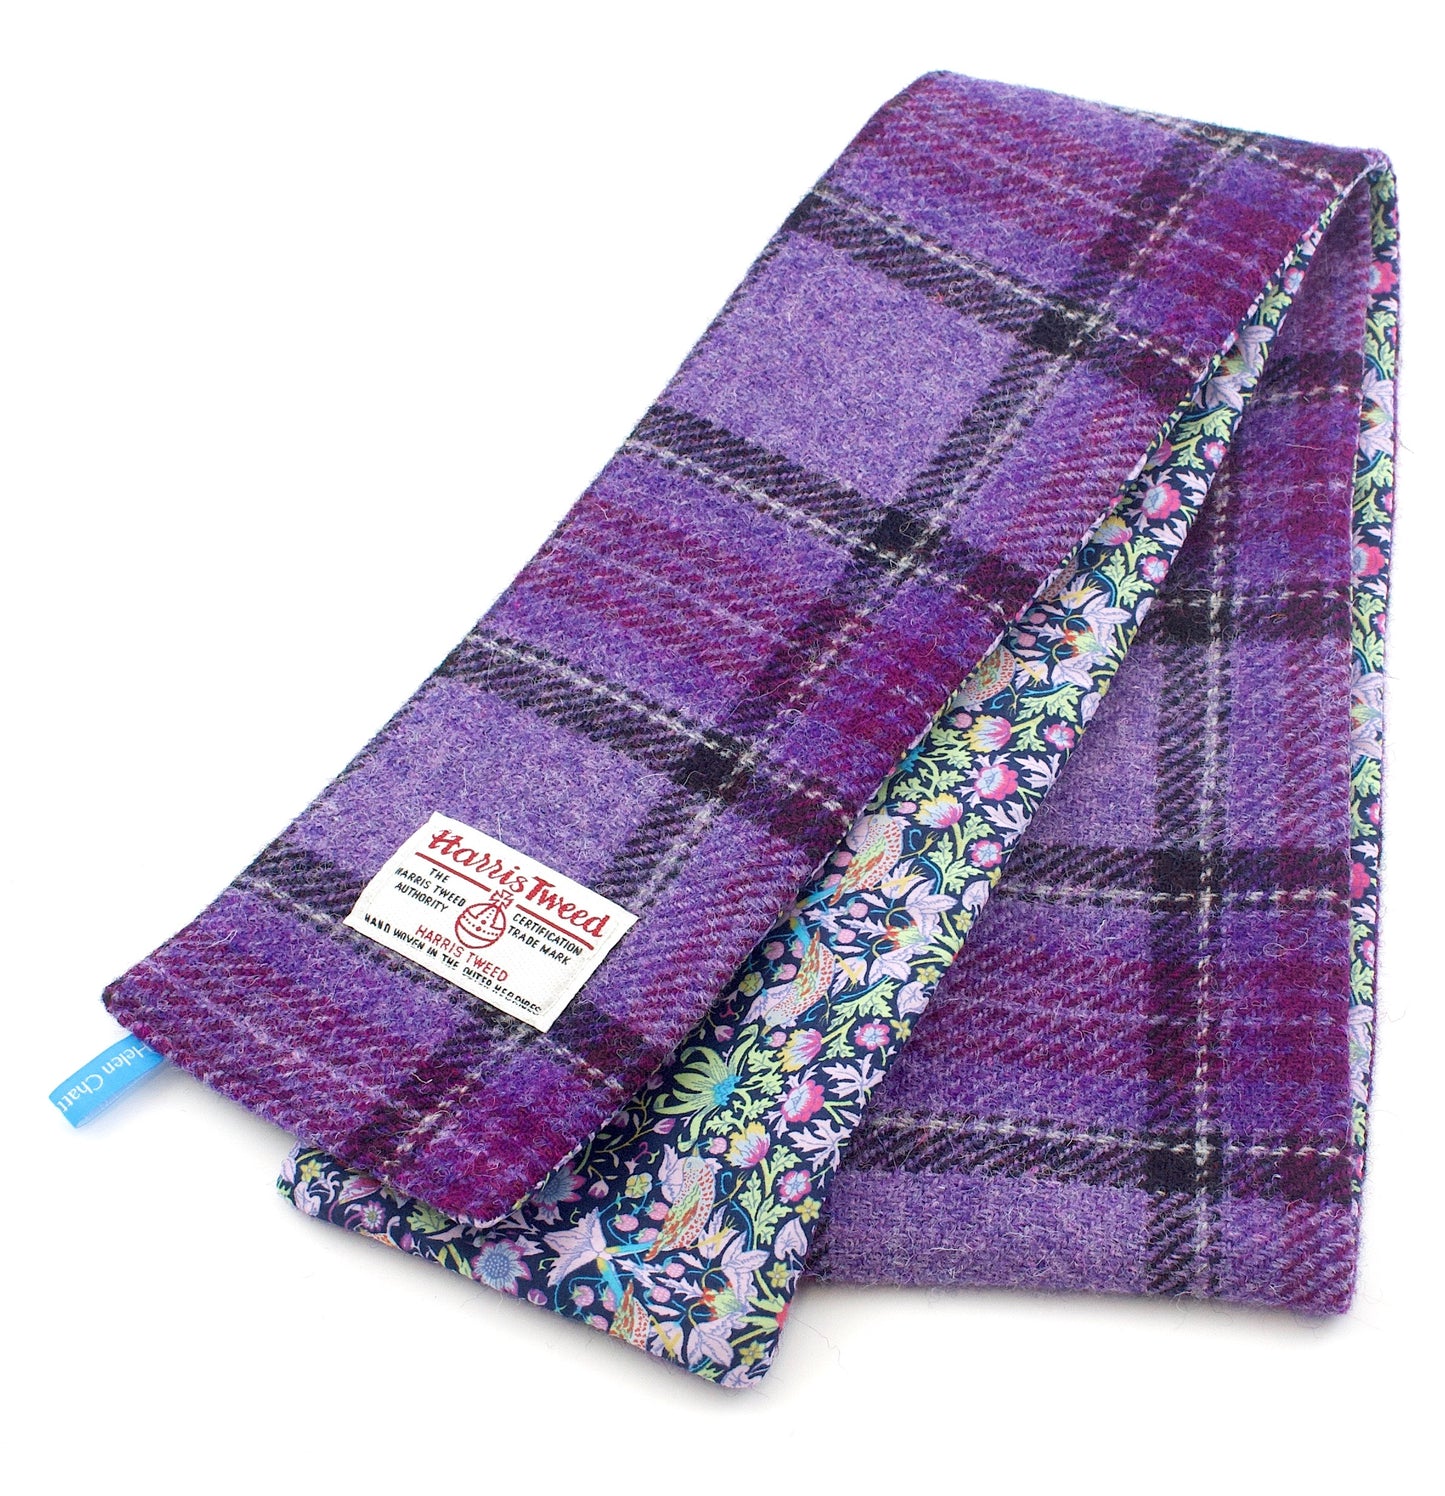 Chatterton Harris Tweed and Liberty Cotton Skinny Scarf -  Lilac Plaid Strawberry Thief